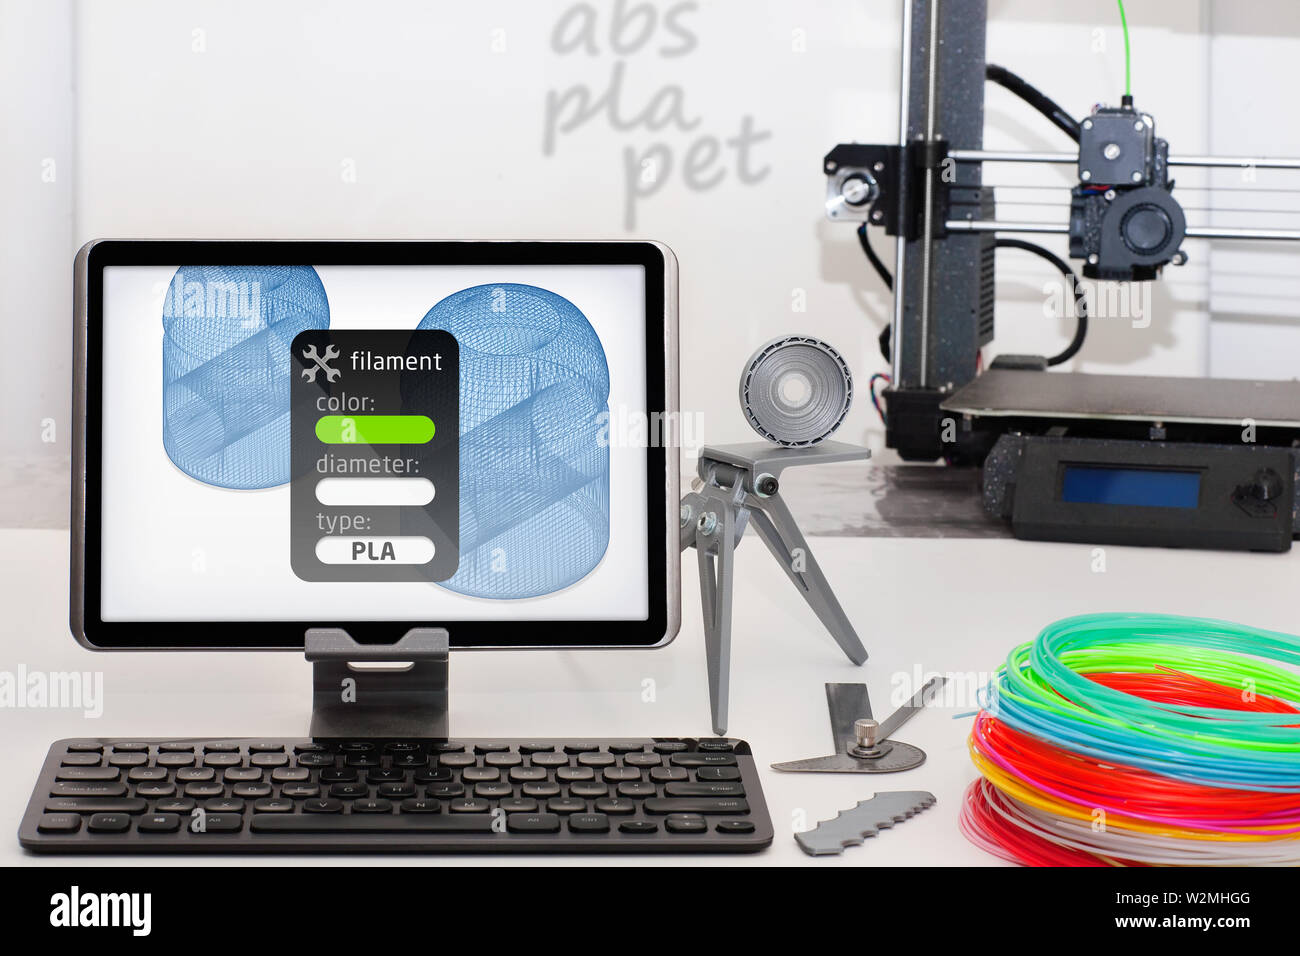 A tablet being used to display 3d printer filament settings and various 3d printer supplies including colorful PLA plastic. Stock Photo